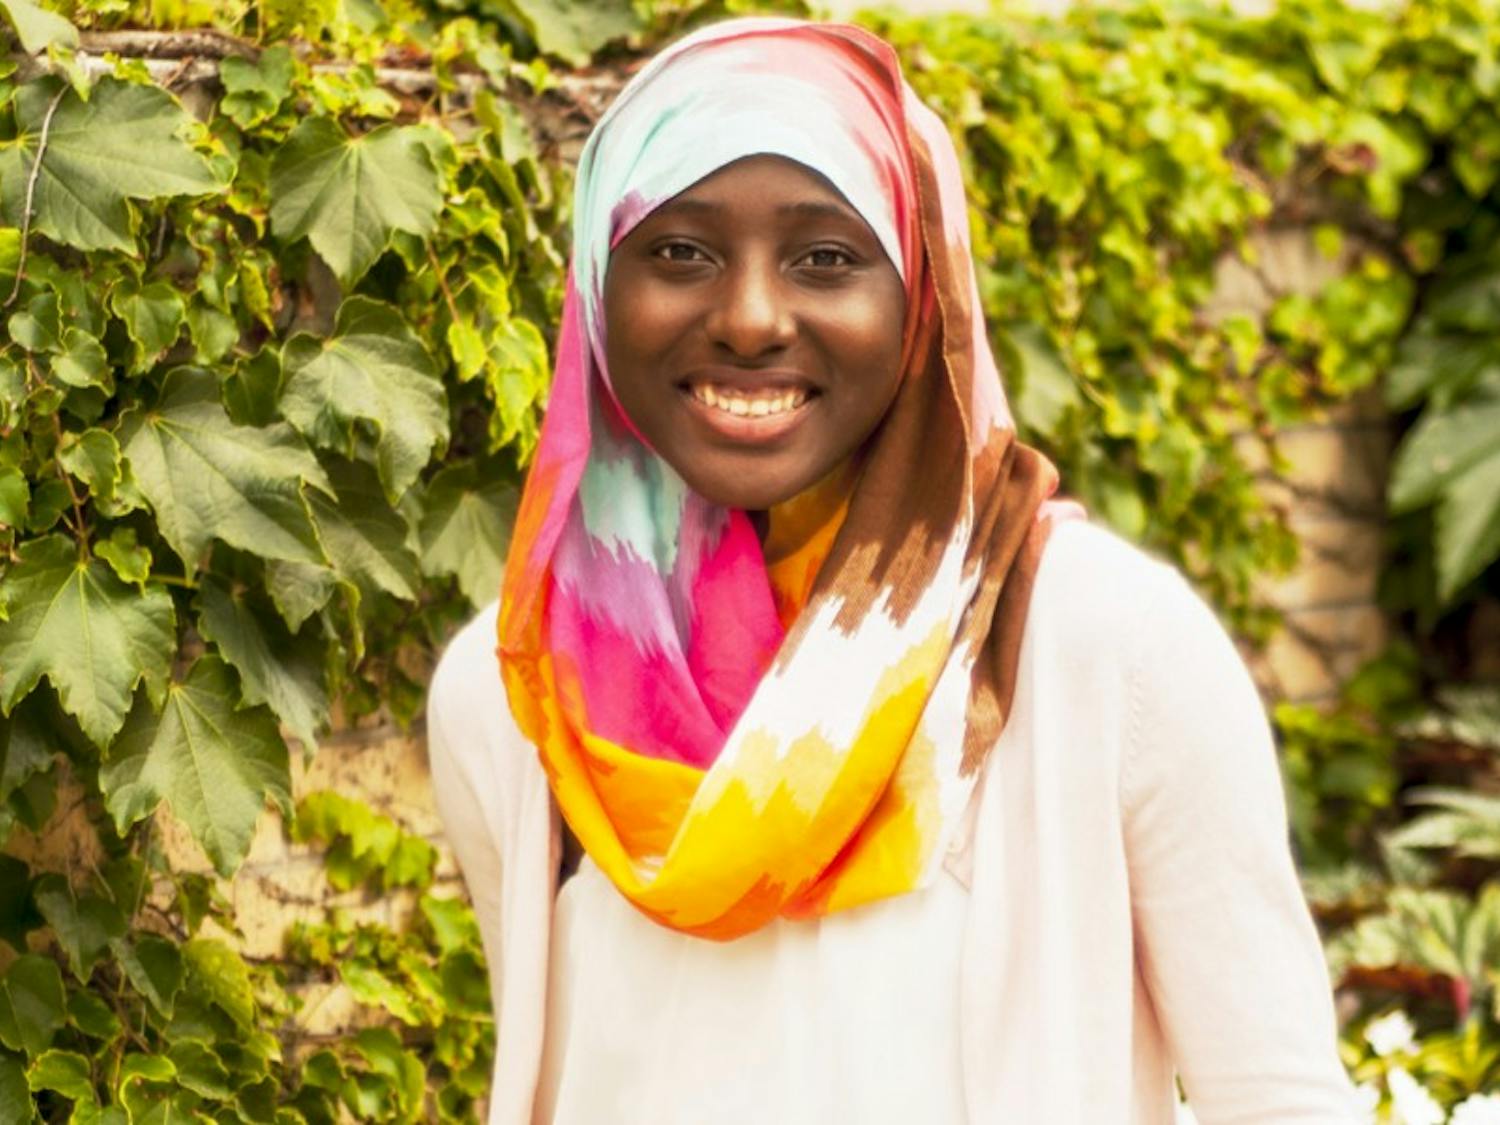 Fatoumata Ceesay is a freshman at UW-Madison, learning about her identity through multicultural experiences.&nbsp;